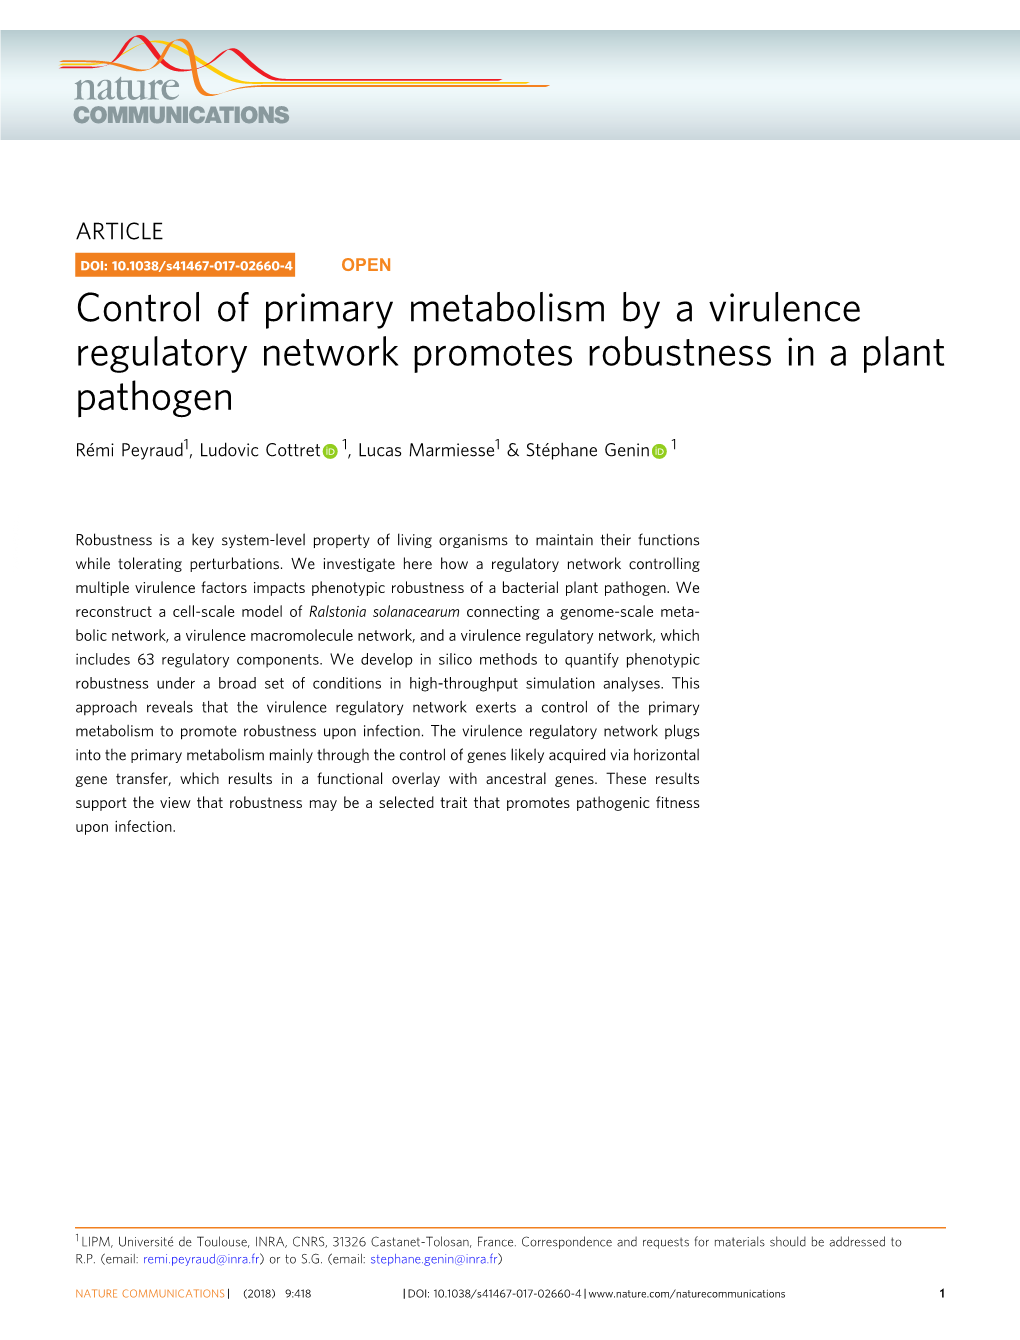 Control of Primary Metabolism by a Virulence Regulatory Network Promotes Robustness in a Plant Pathogen